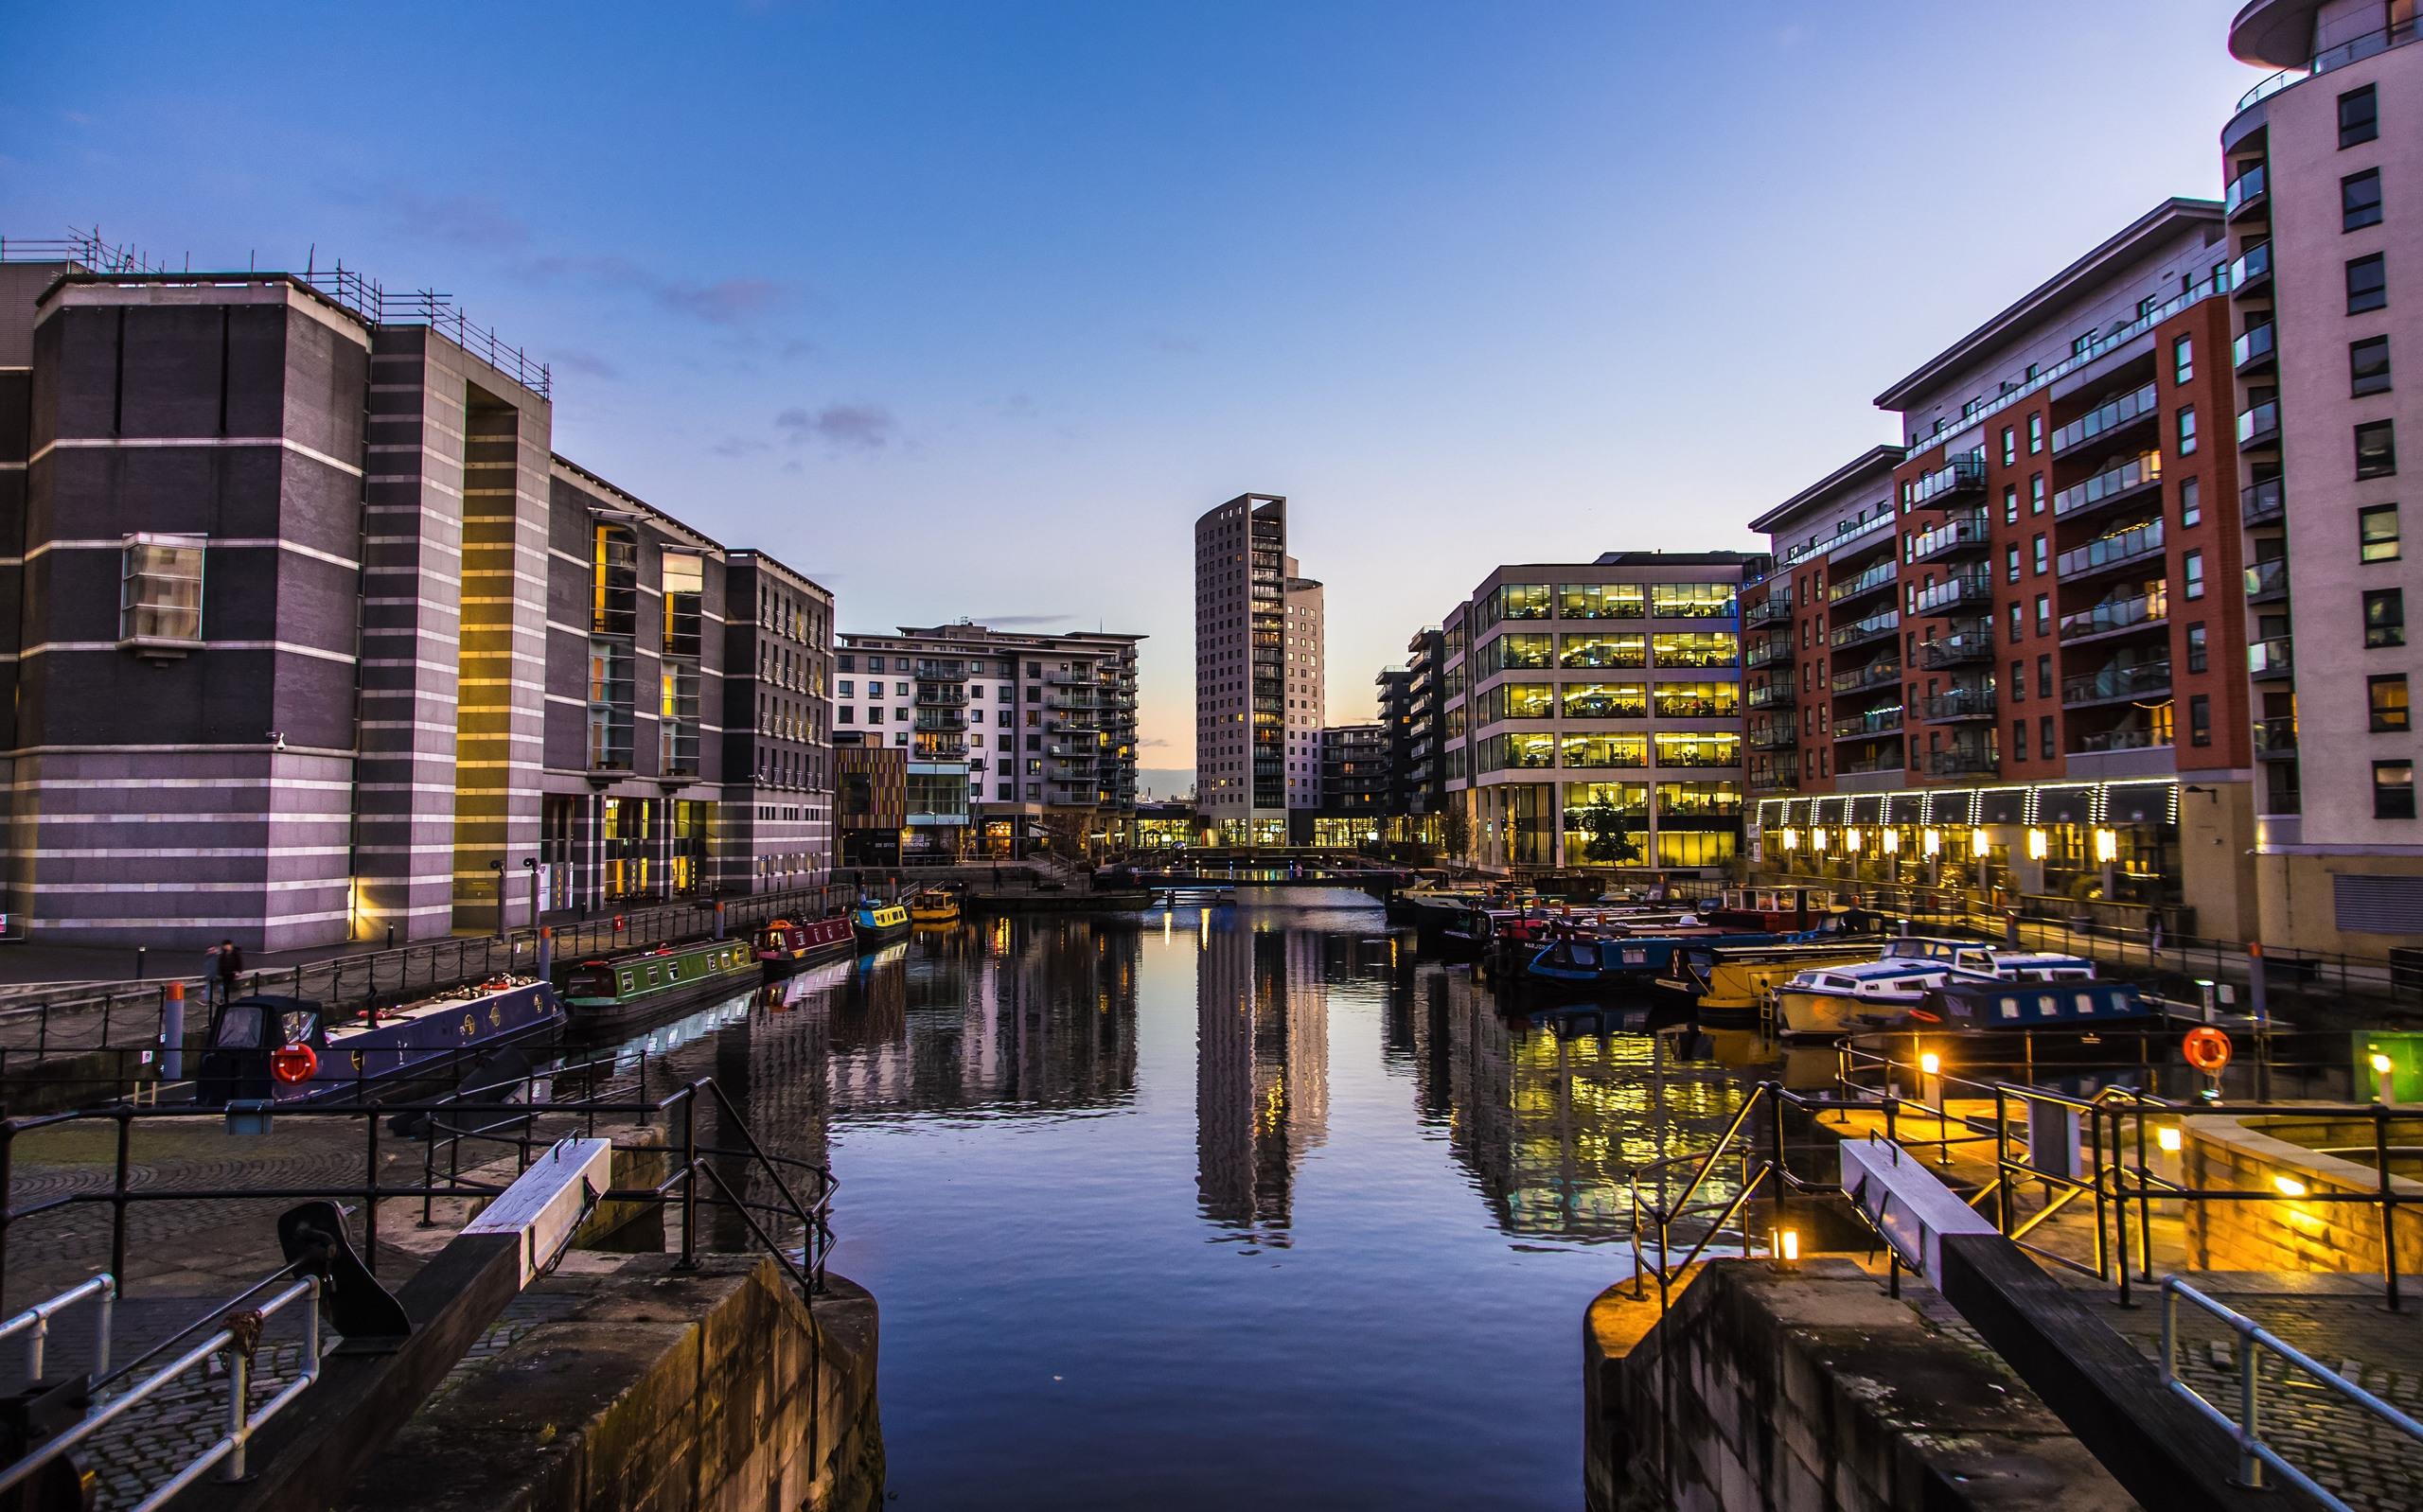 A view of the Clarence Dock in Leeds